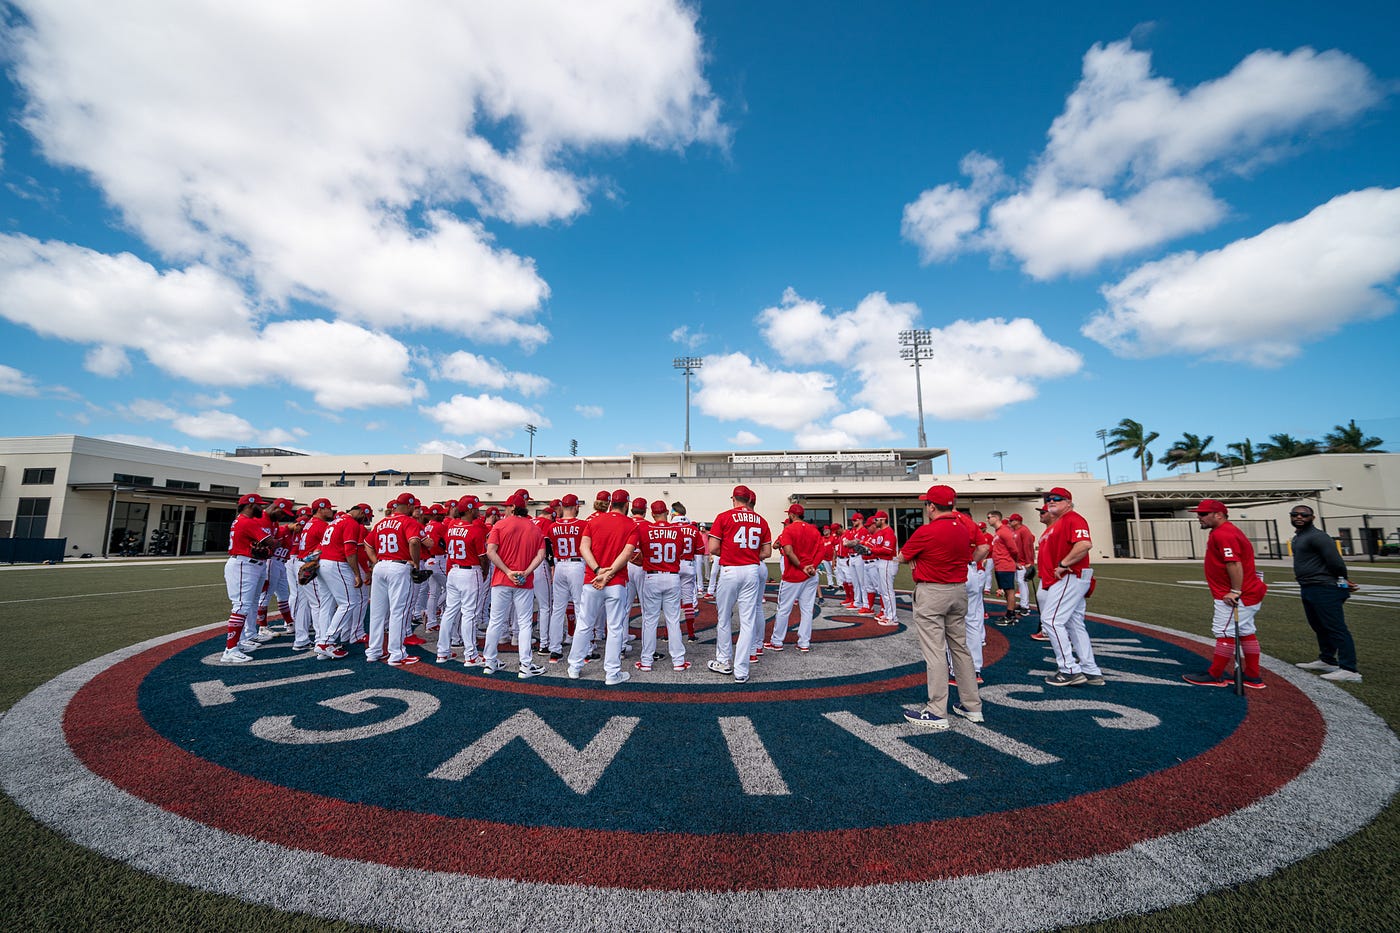 Cardinals to televise 15 spring training games, including Feb. 25